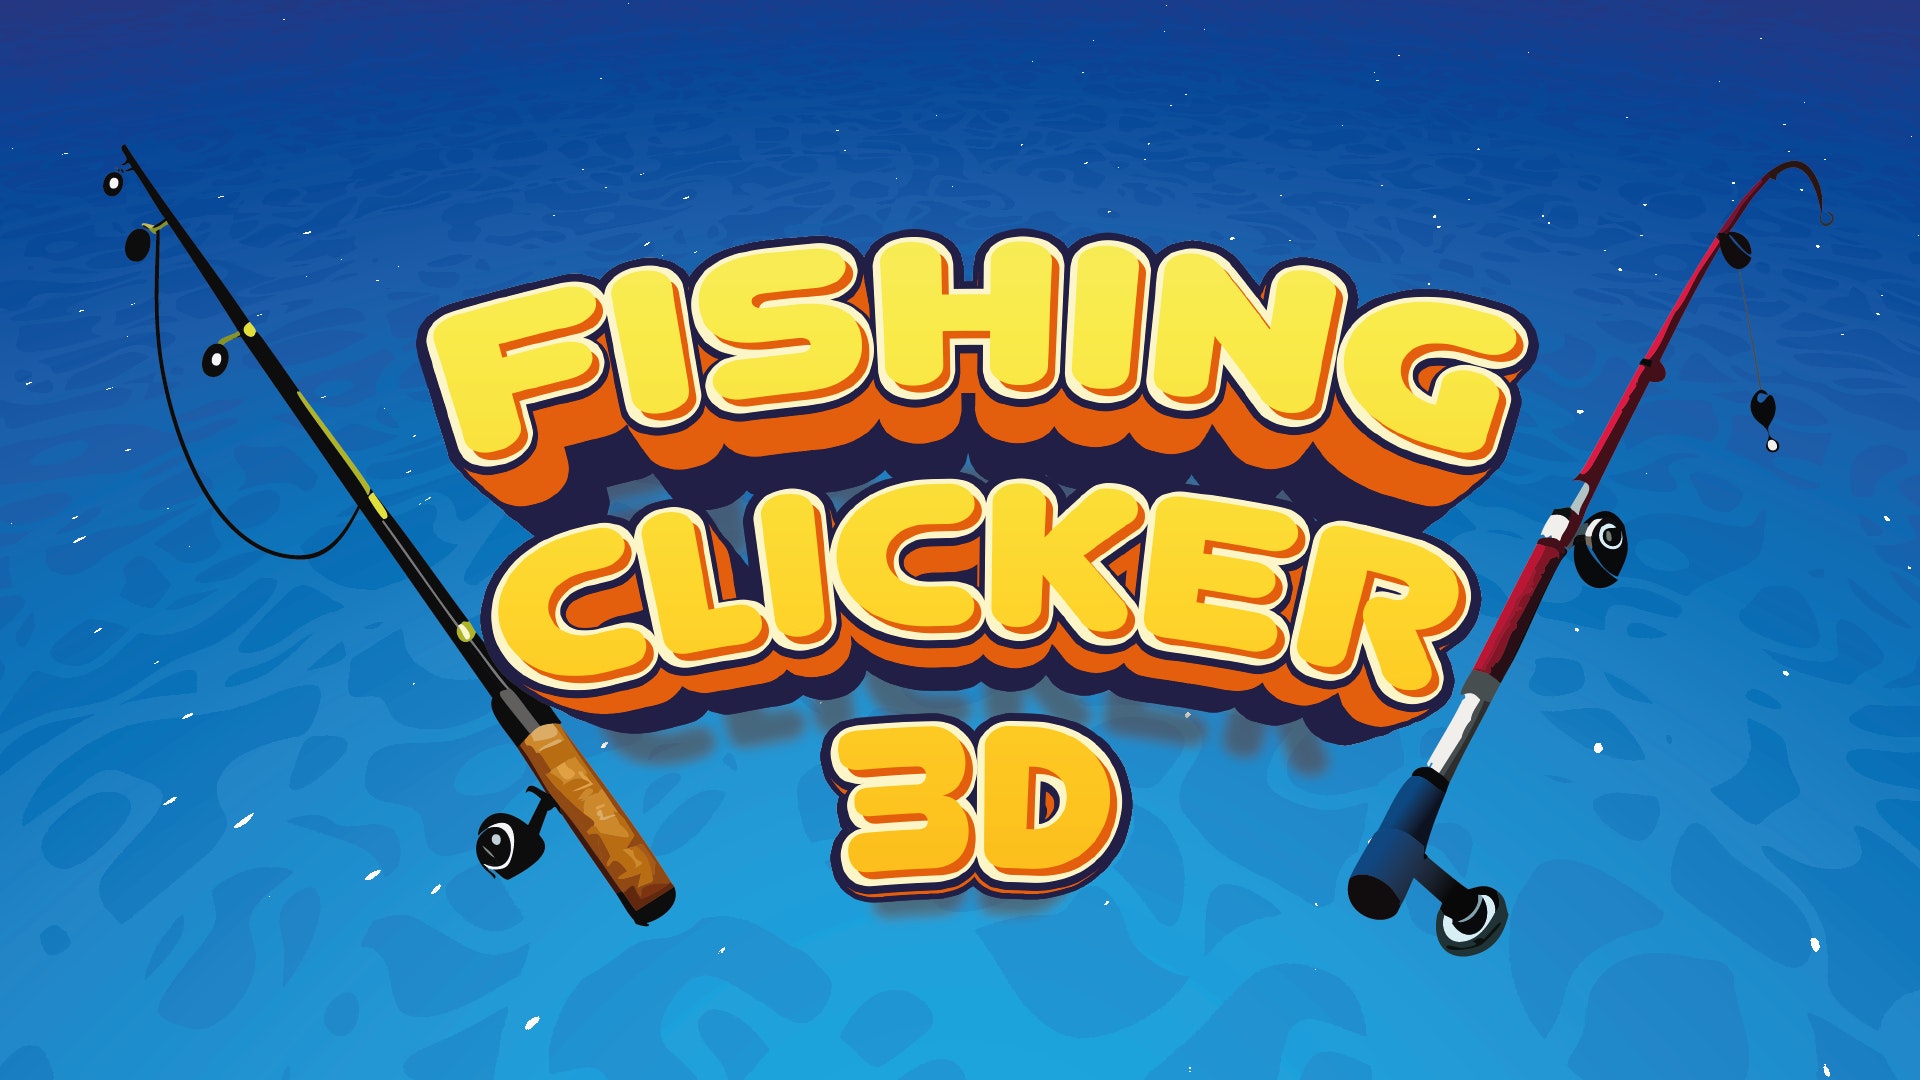 Fishing 2 Online - Free Play & No Download